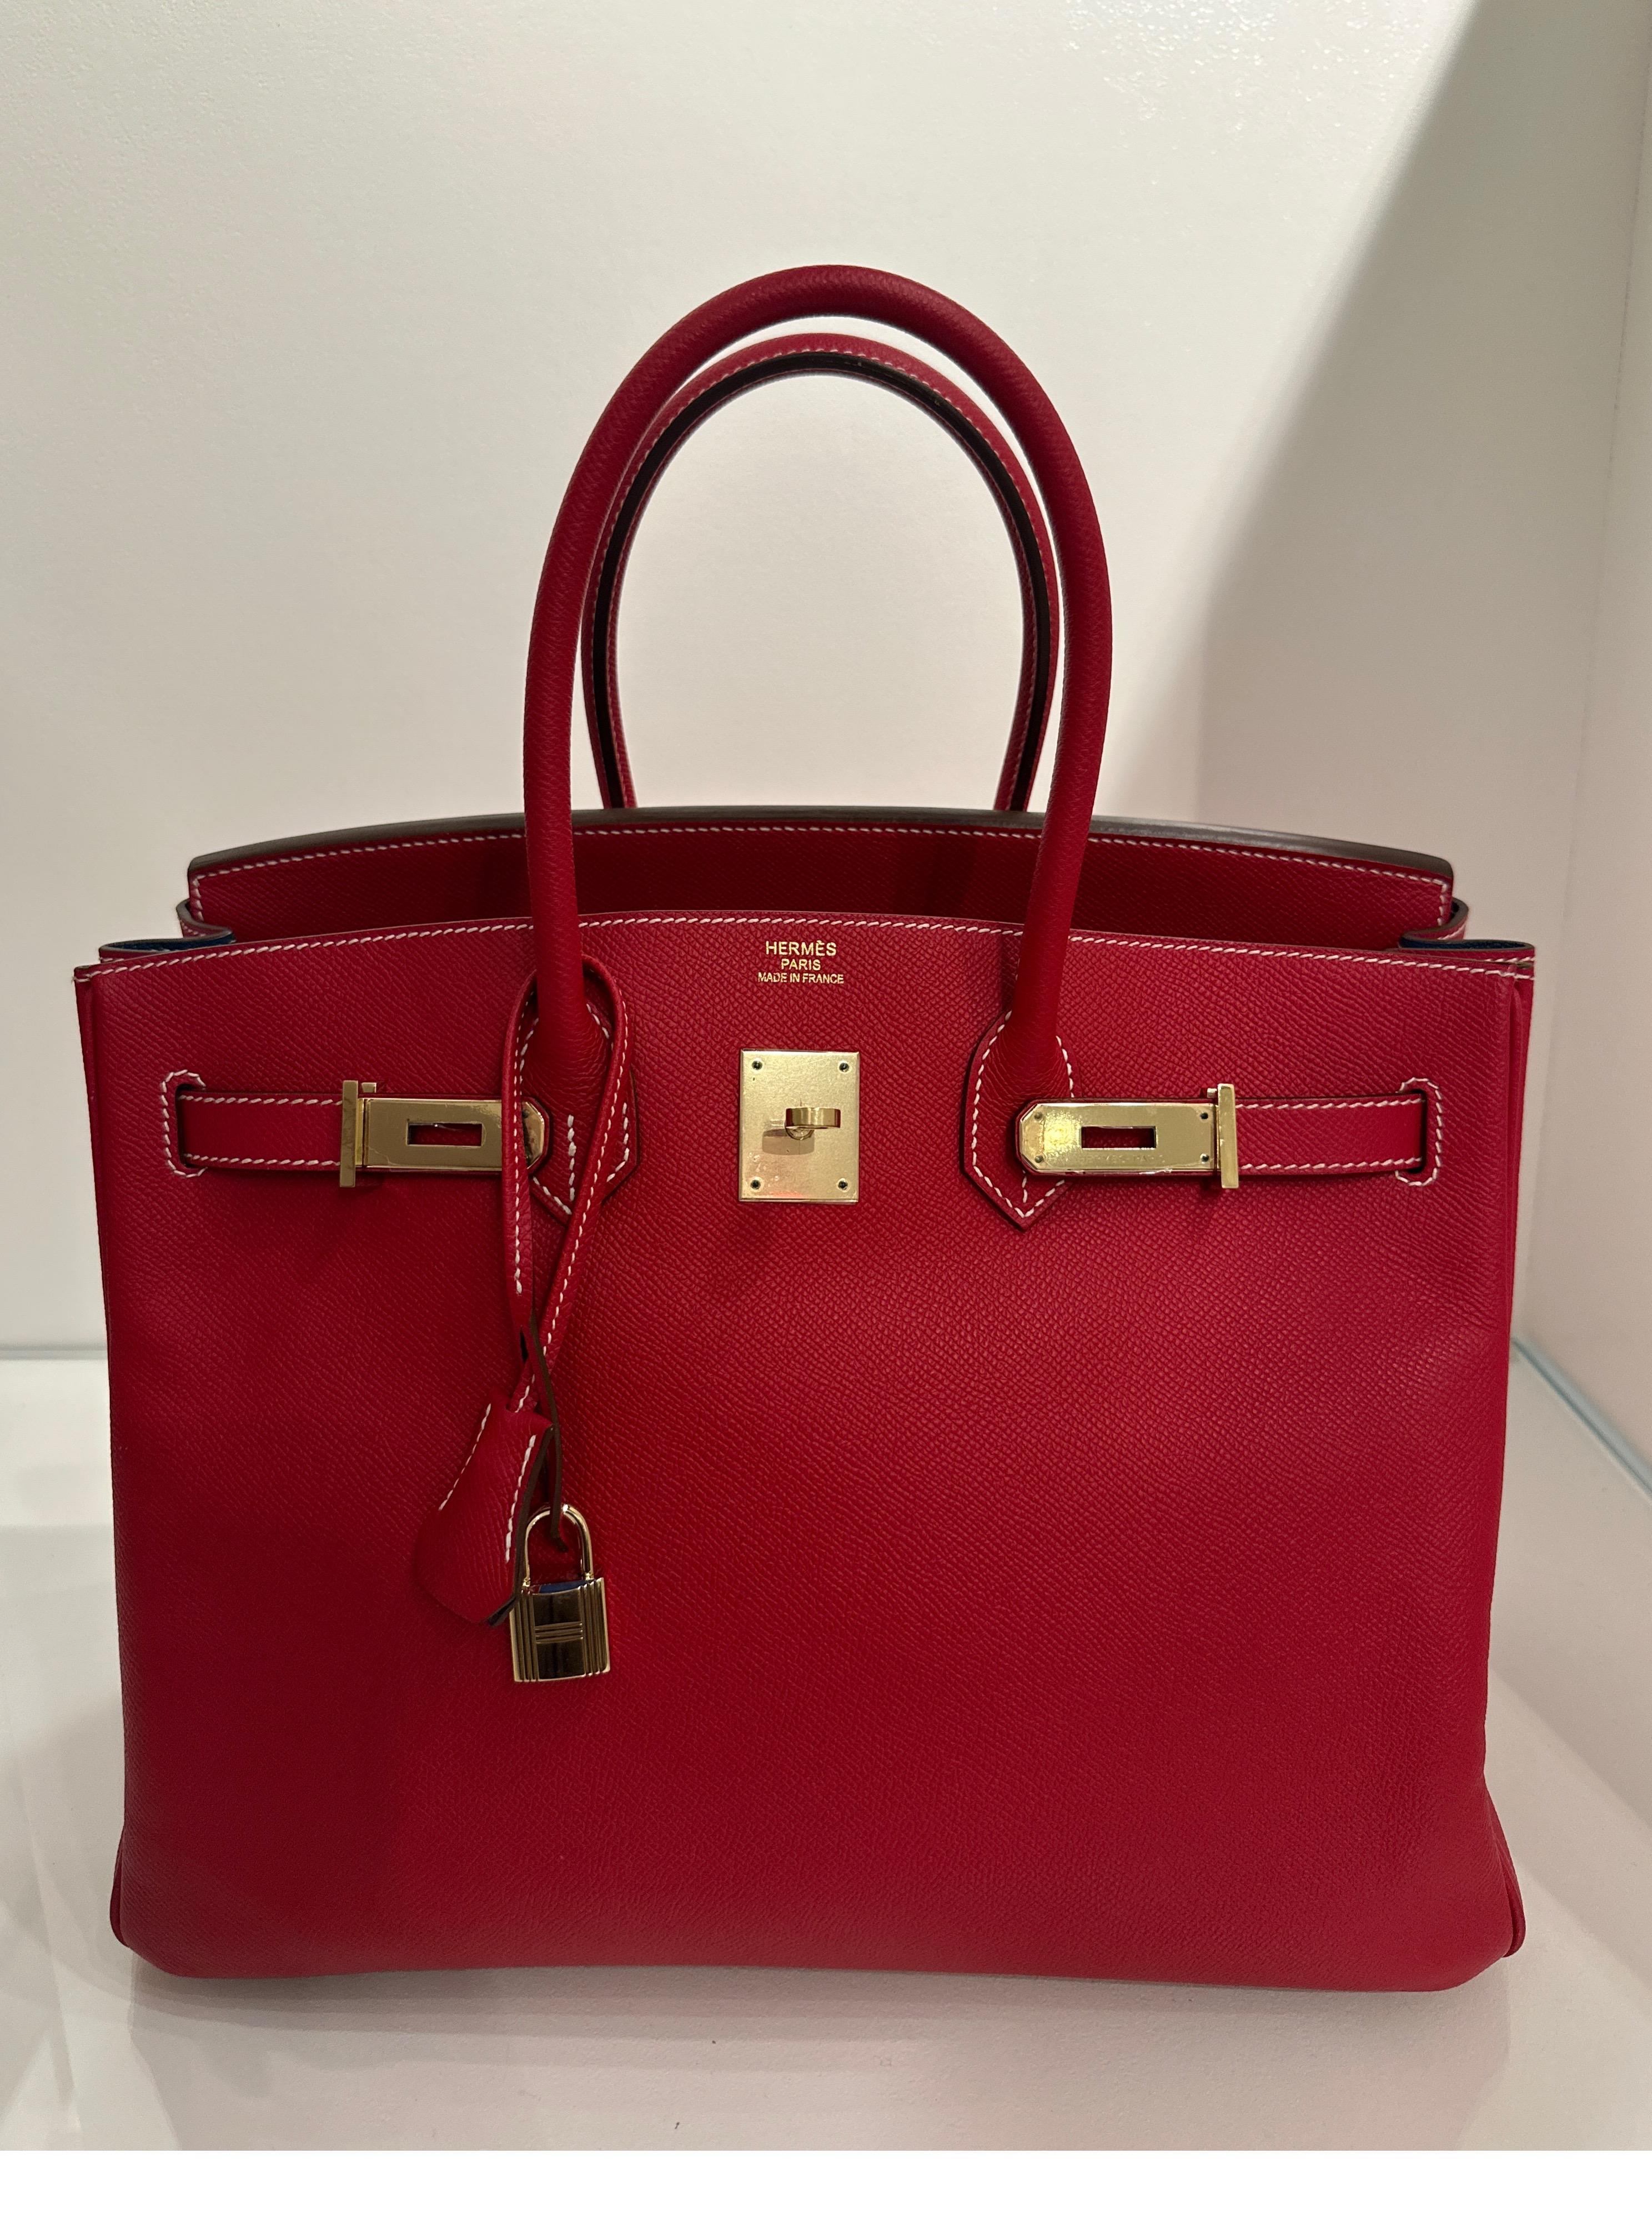 Hermes Rouge Casaque Birkin 35 Bag. Beautiful red Birkin with blue mykonos interior. Candy collection. Gold hardware. Epsom leather. Excellent condition. Plastic is still on hardware. Includes dust bag and box. Guaranteed authentic. 